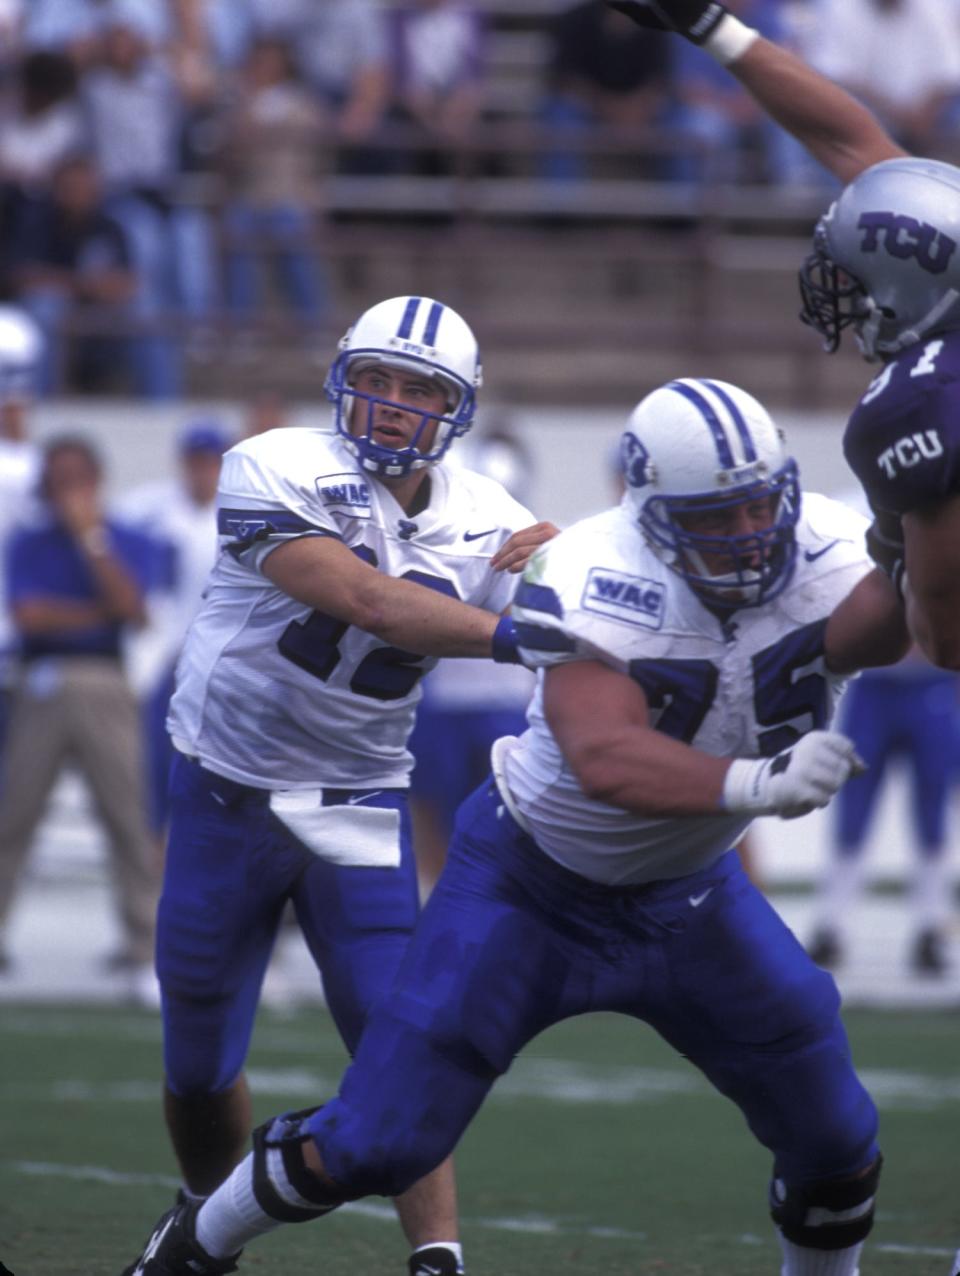 BYU quarterback Steve Sarkisian throws a pass during the Cougars' 45-21 win at TCU in 1996. The Cougars went 14-1 that year, becoming the first school in NCAA history to win 14 games in a season.